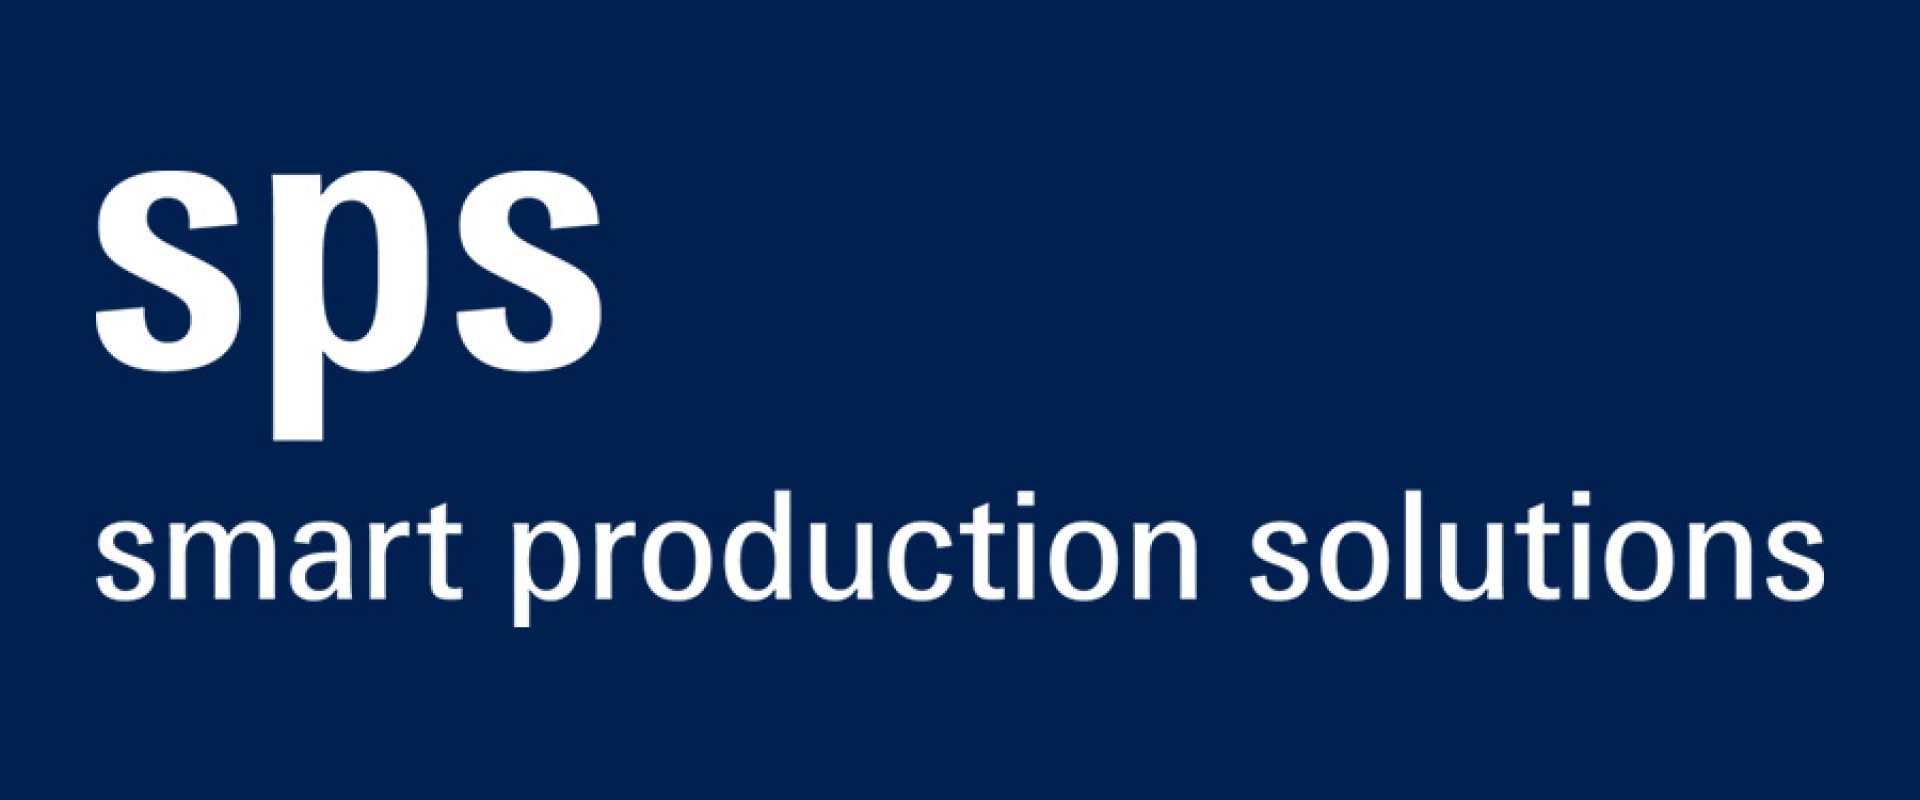 SPS – Smart Production Solutions 2019